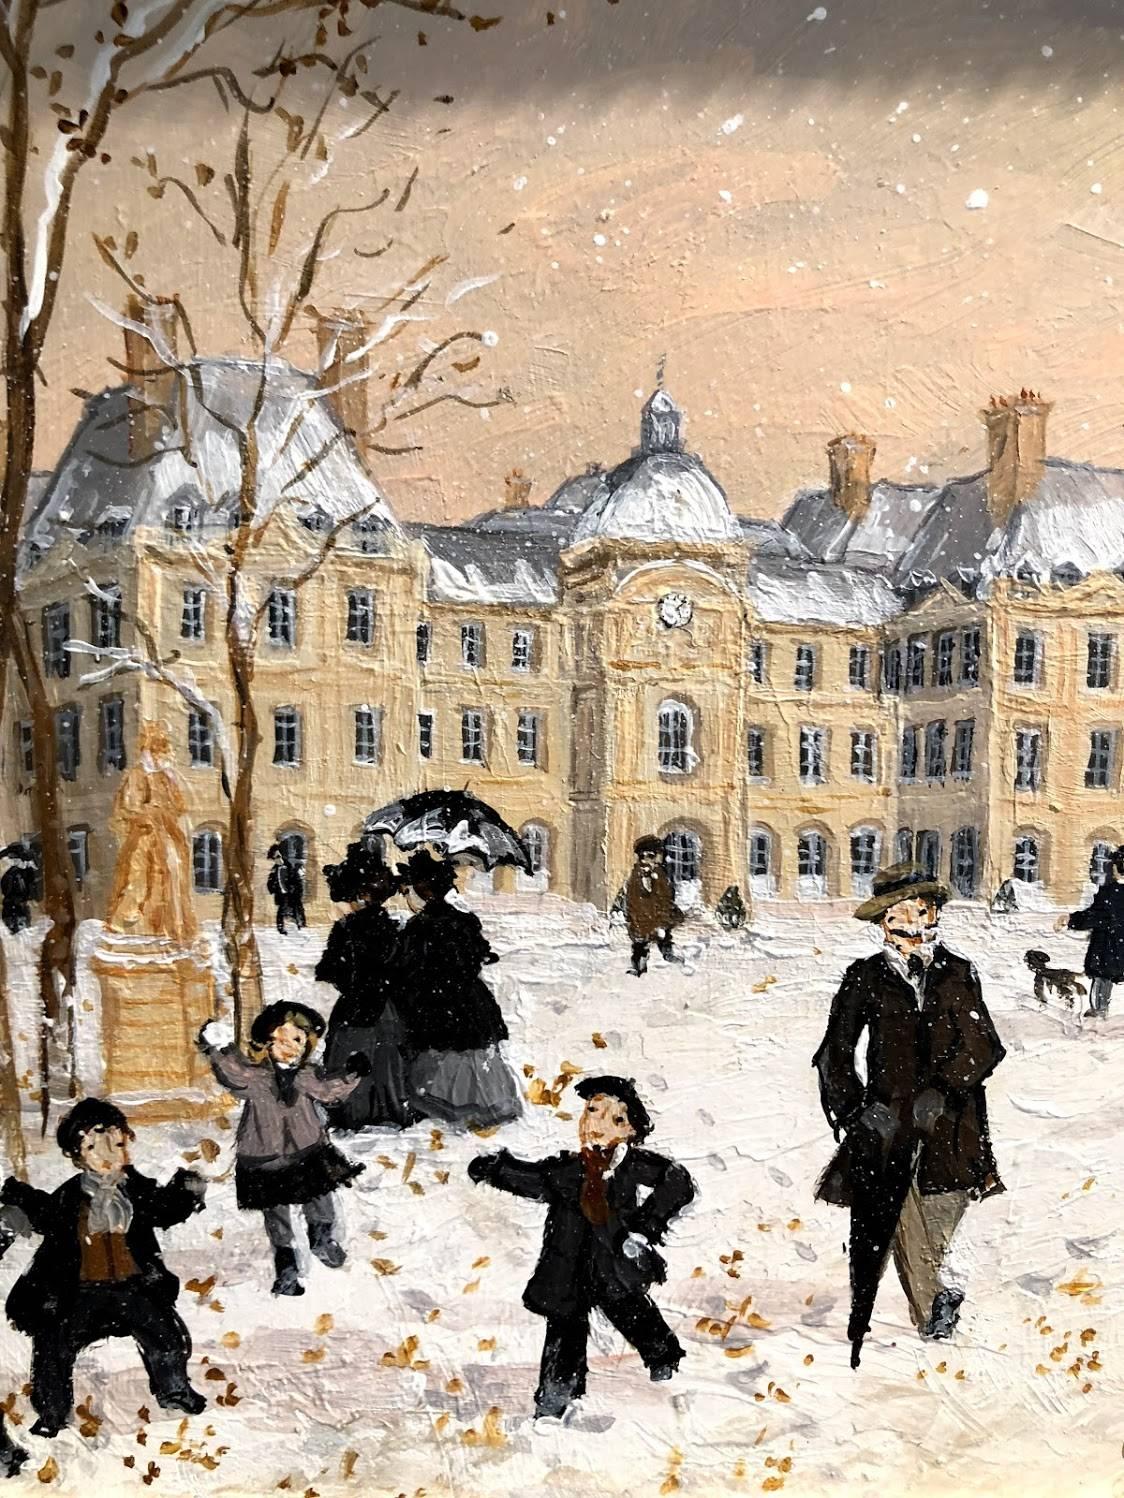 This charming Acrylic Painting depicts Paris in the 19th century as children and families run around on the Jardin du Luxembourg with snow on the ground. The pale, bring pinks and whites create a warm and playful atmosphere.

Fabienne Delacroix is